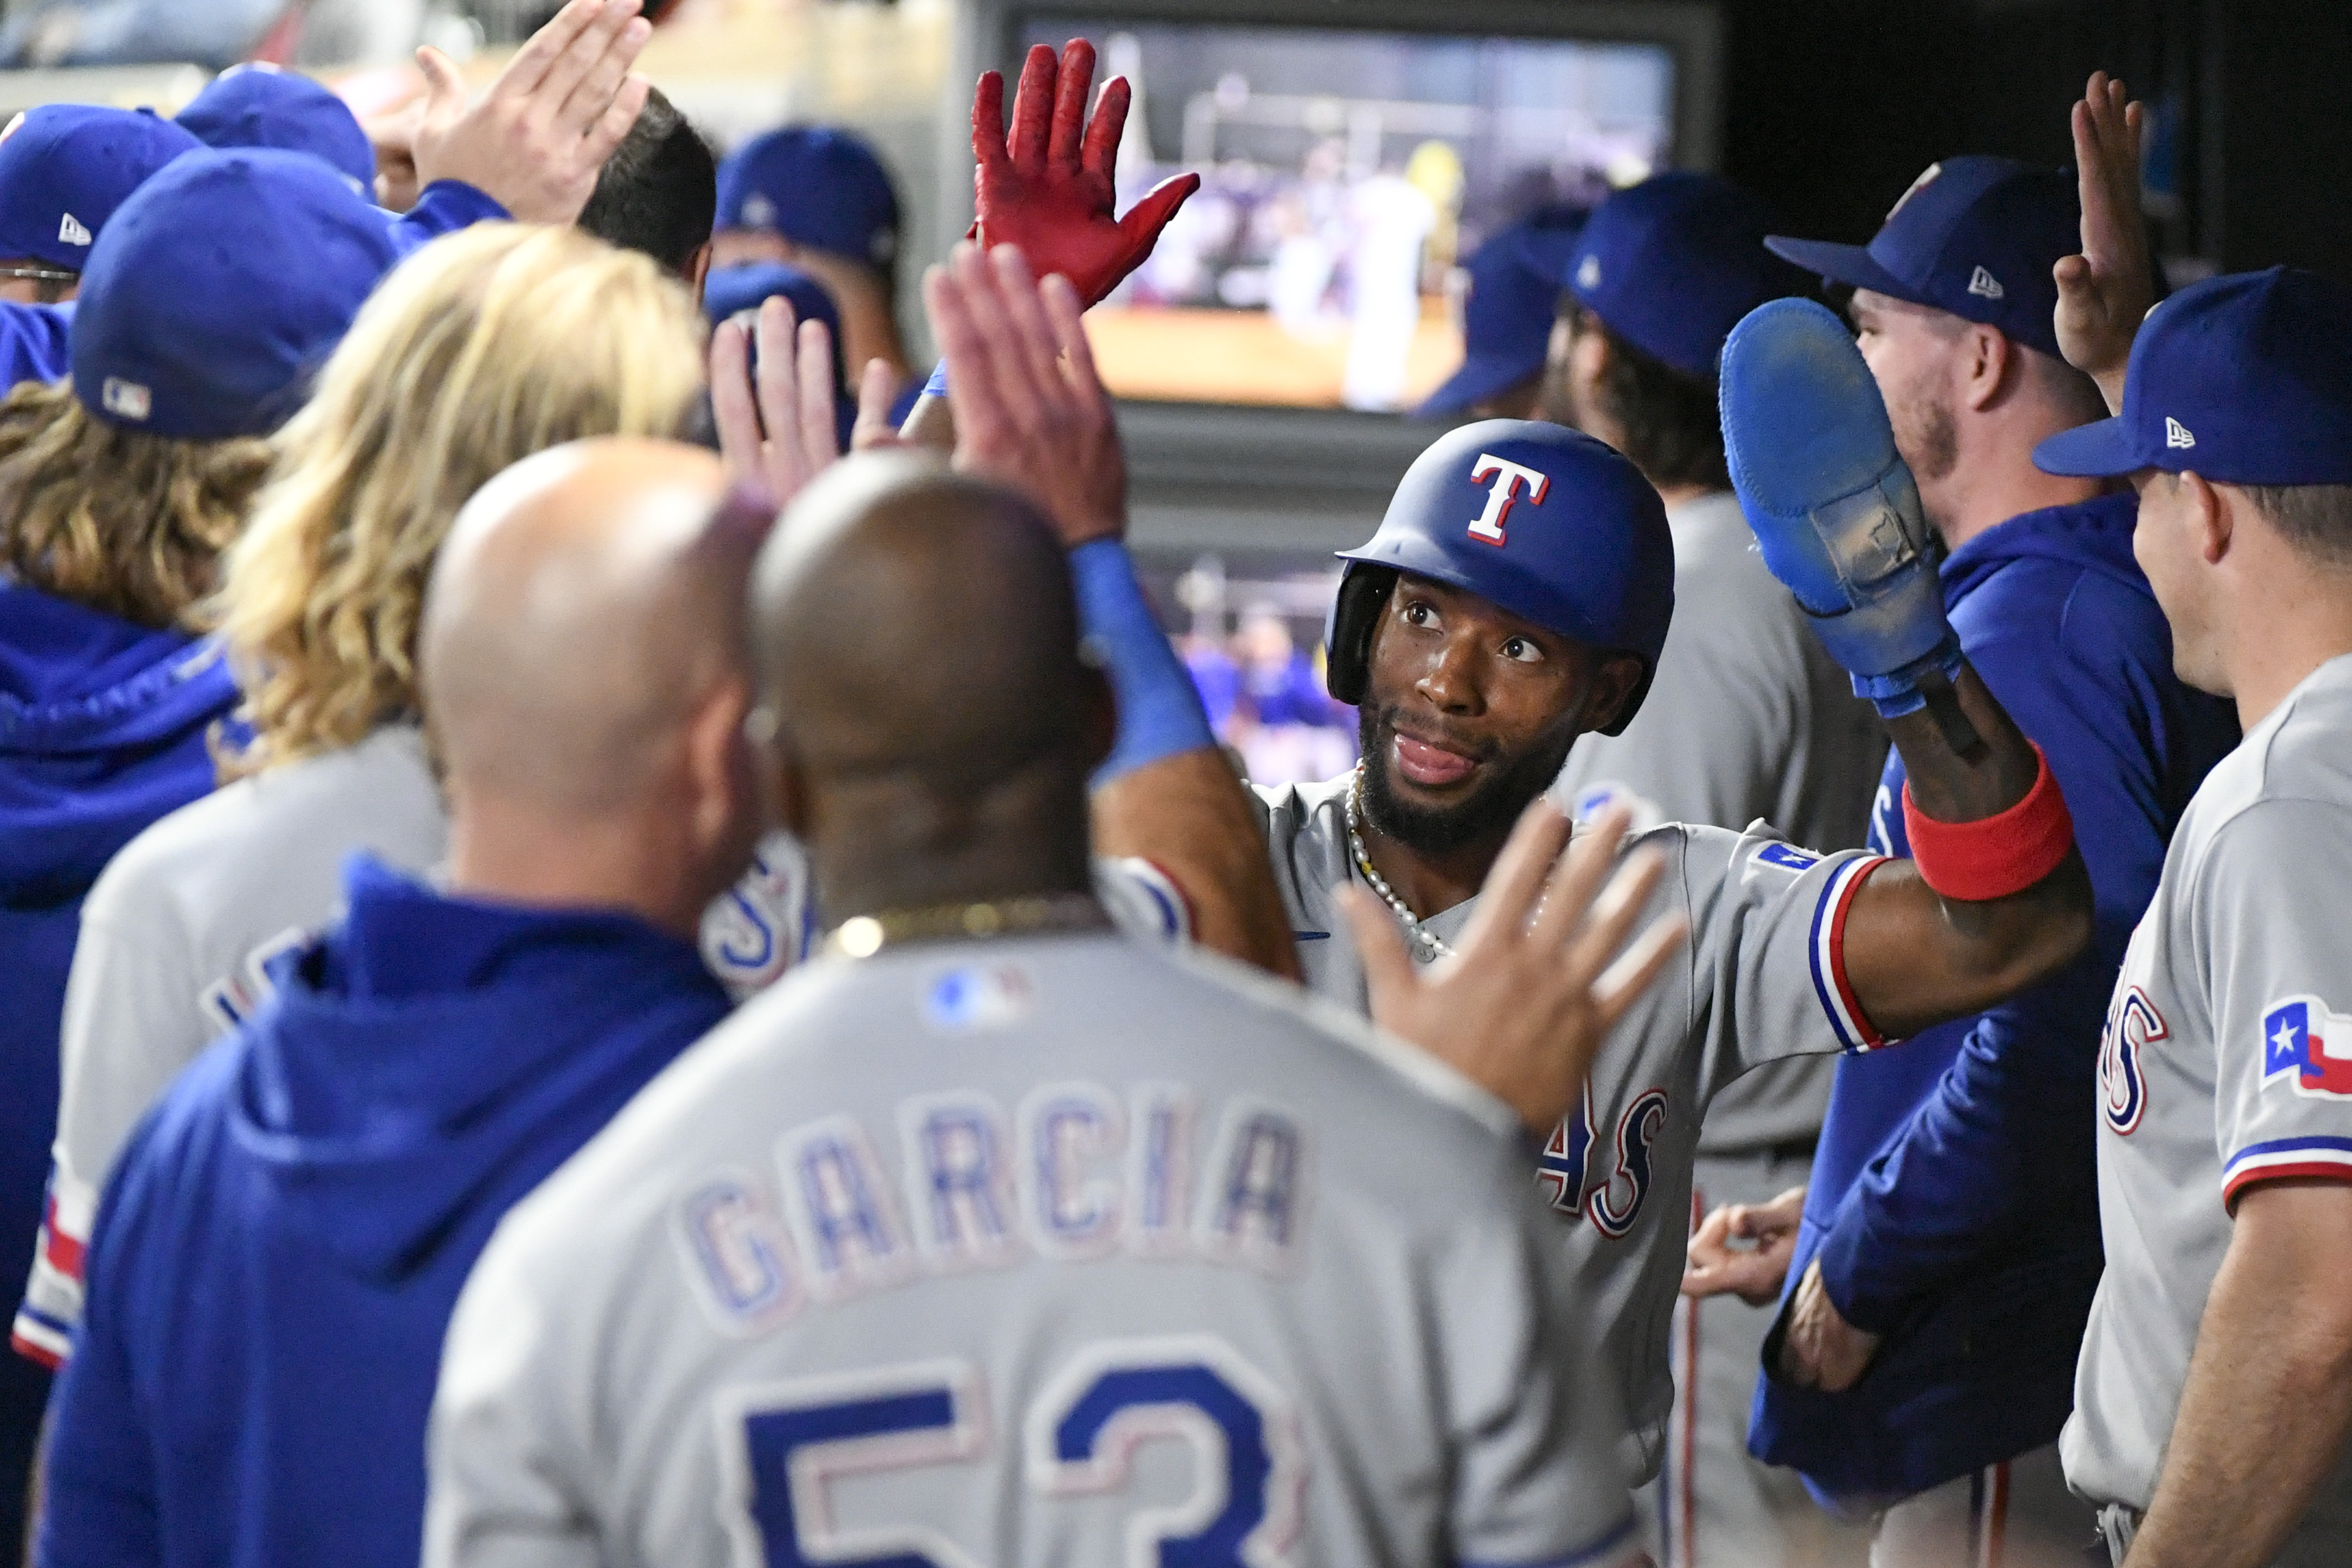 Rangers lose lead in ninth, split two-game set with Athletics